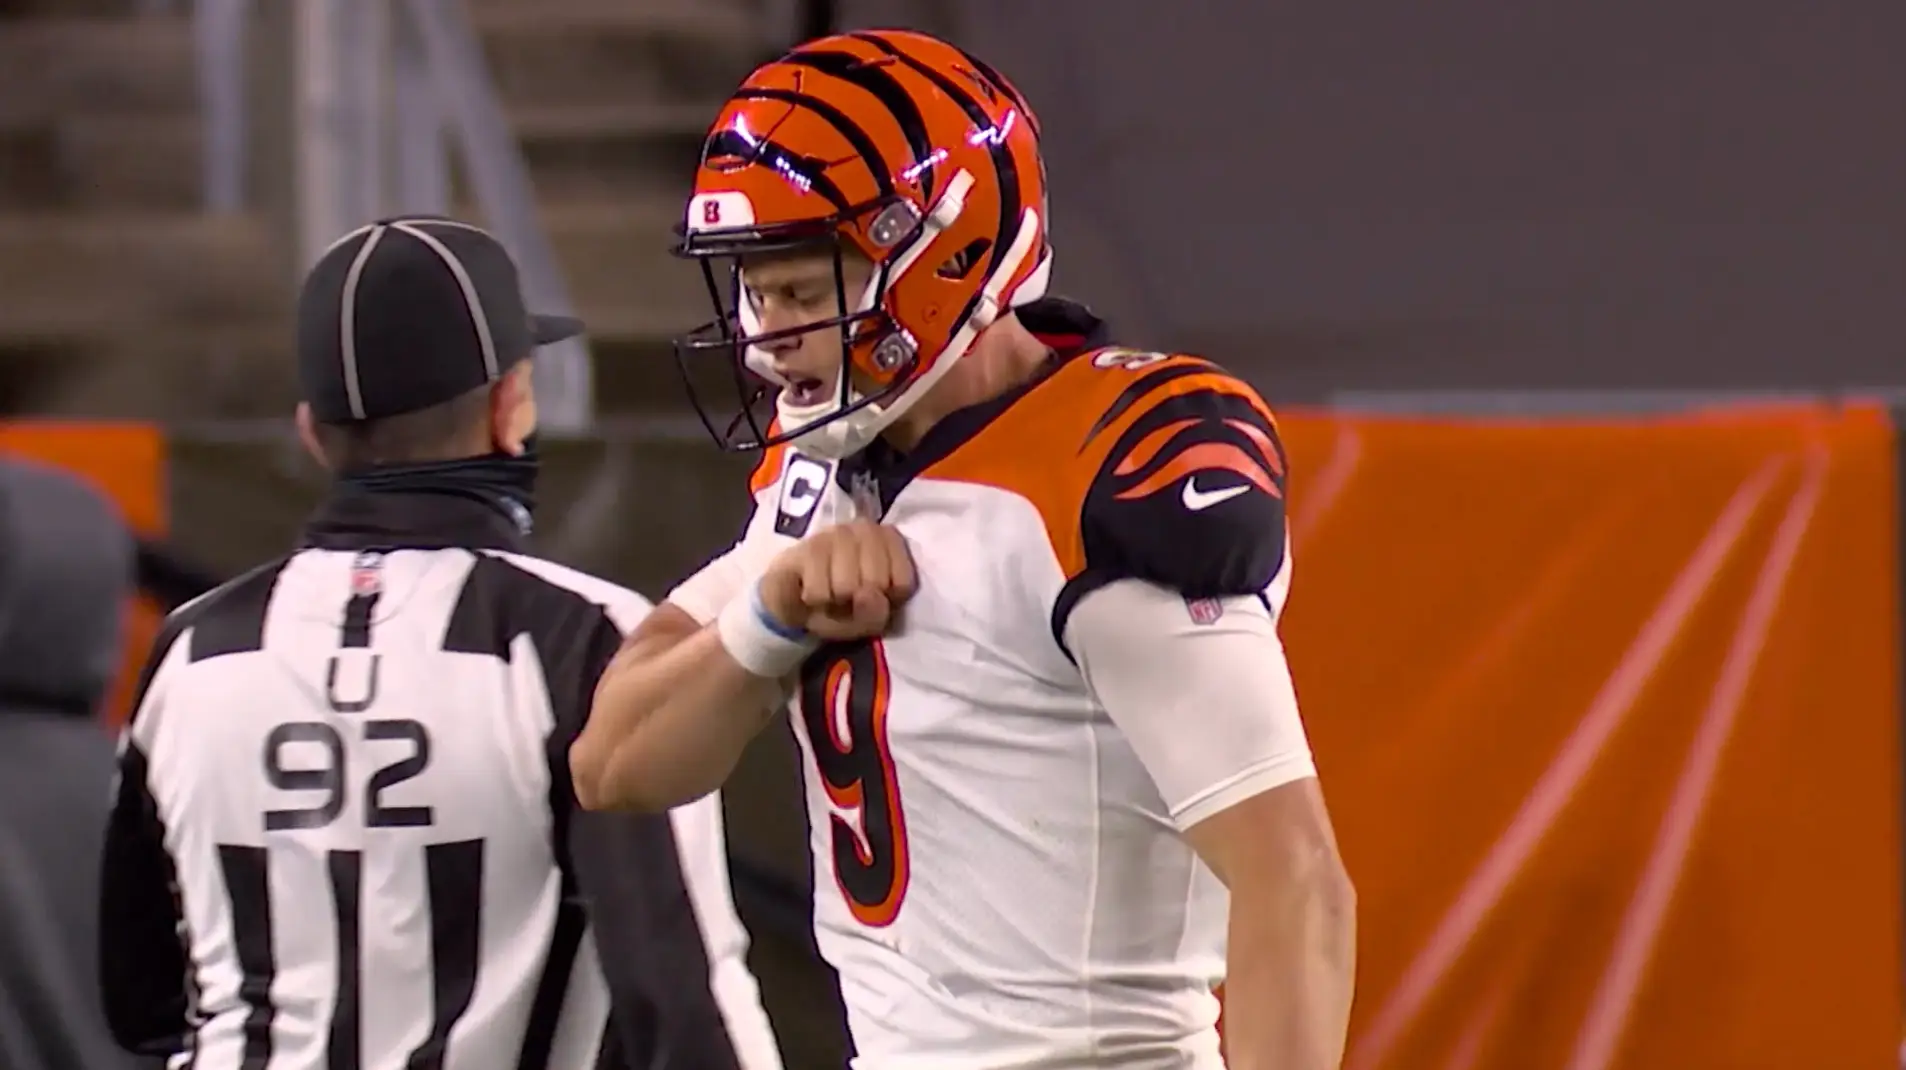 The Cincinnati Bengals quarterback is throwing the ball to the referee during Sunday Night Football on NBC Peacock.